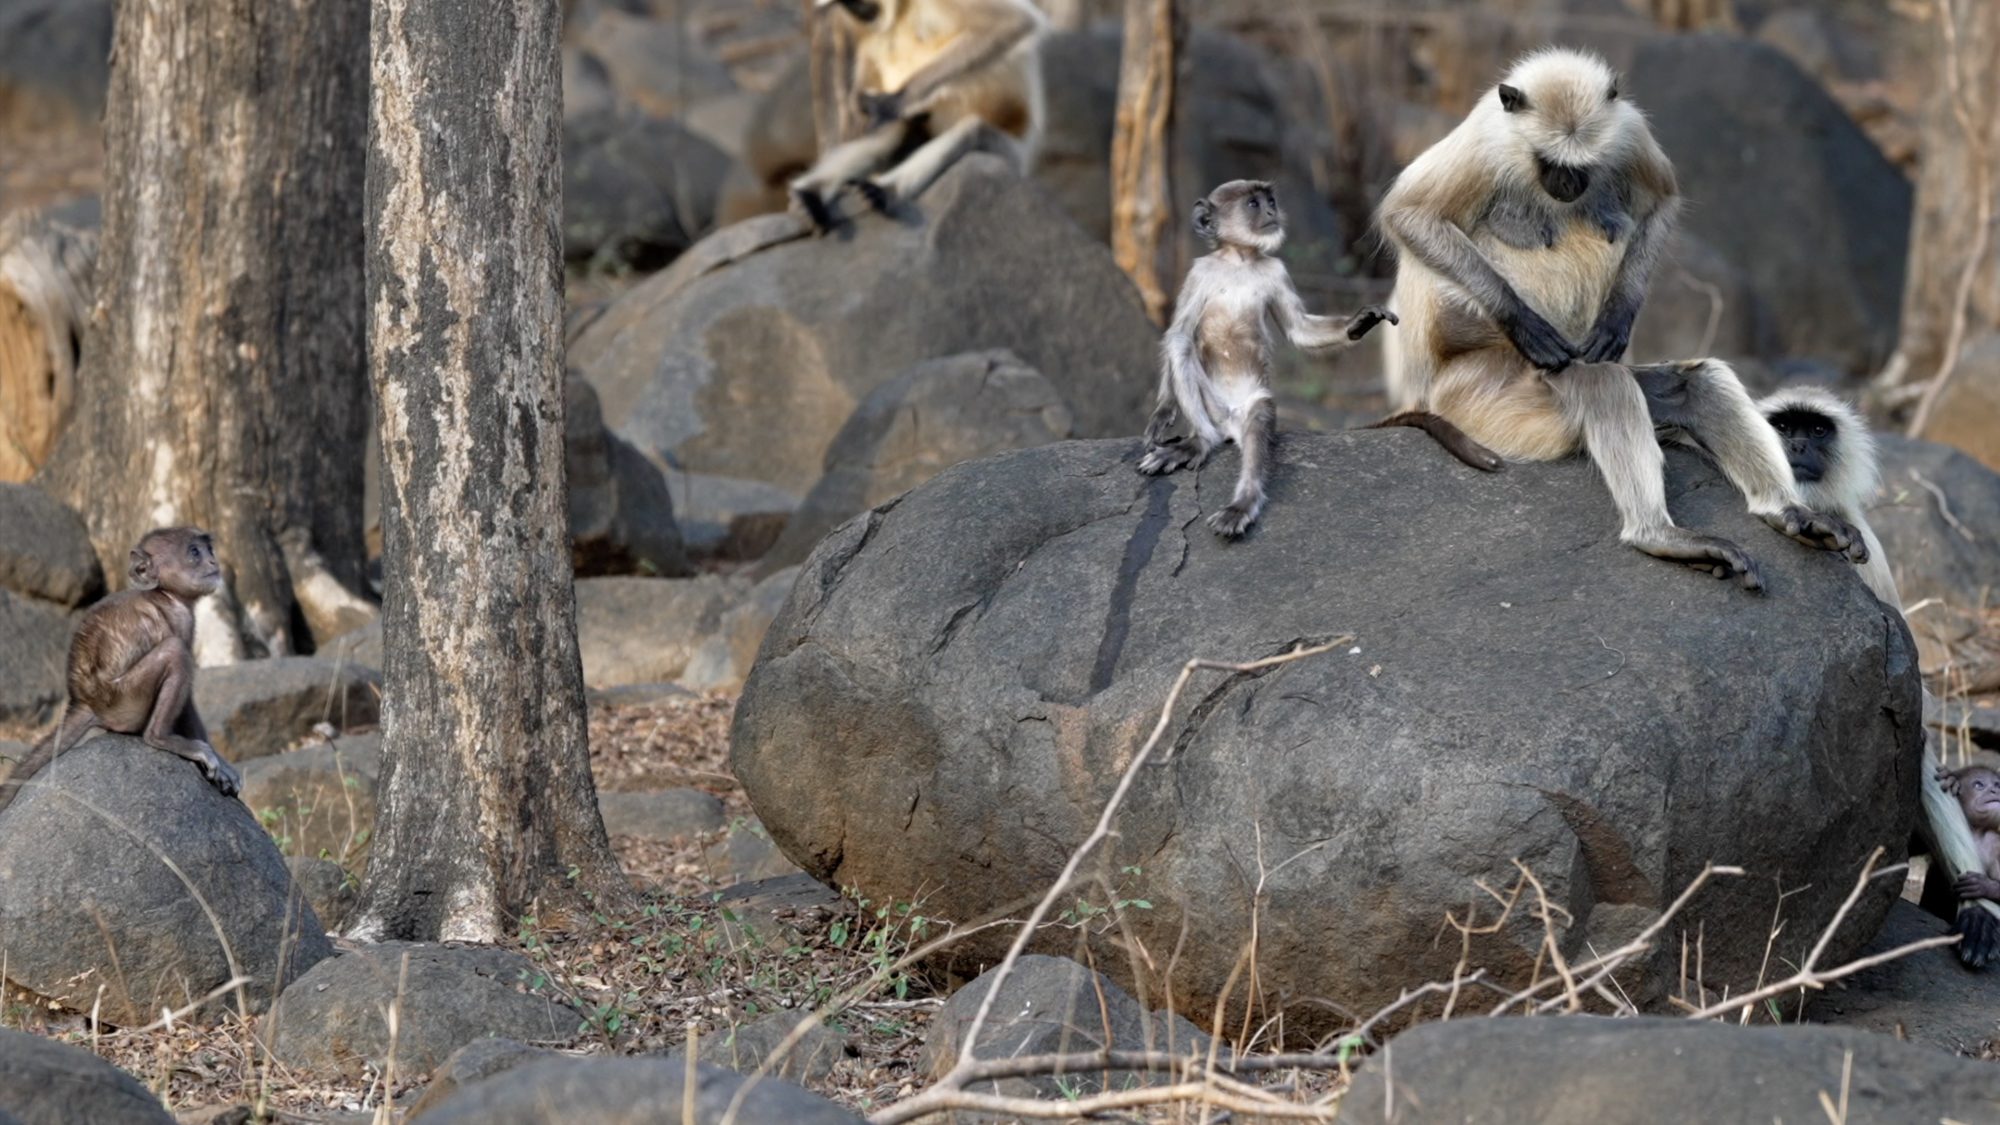 Monkeys fool around: young Langurs have fun – India 2023